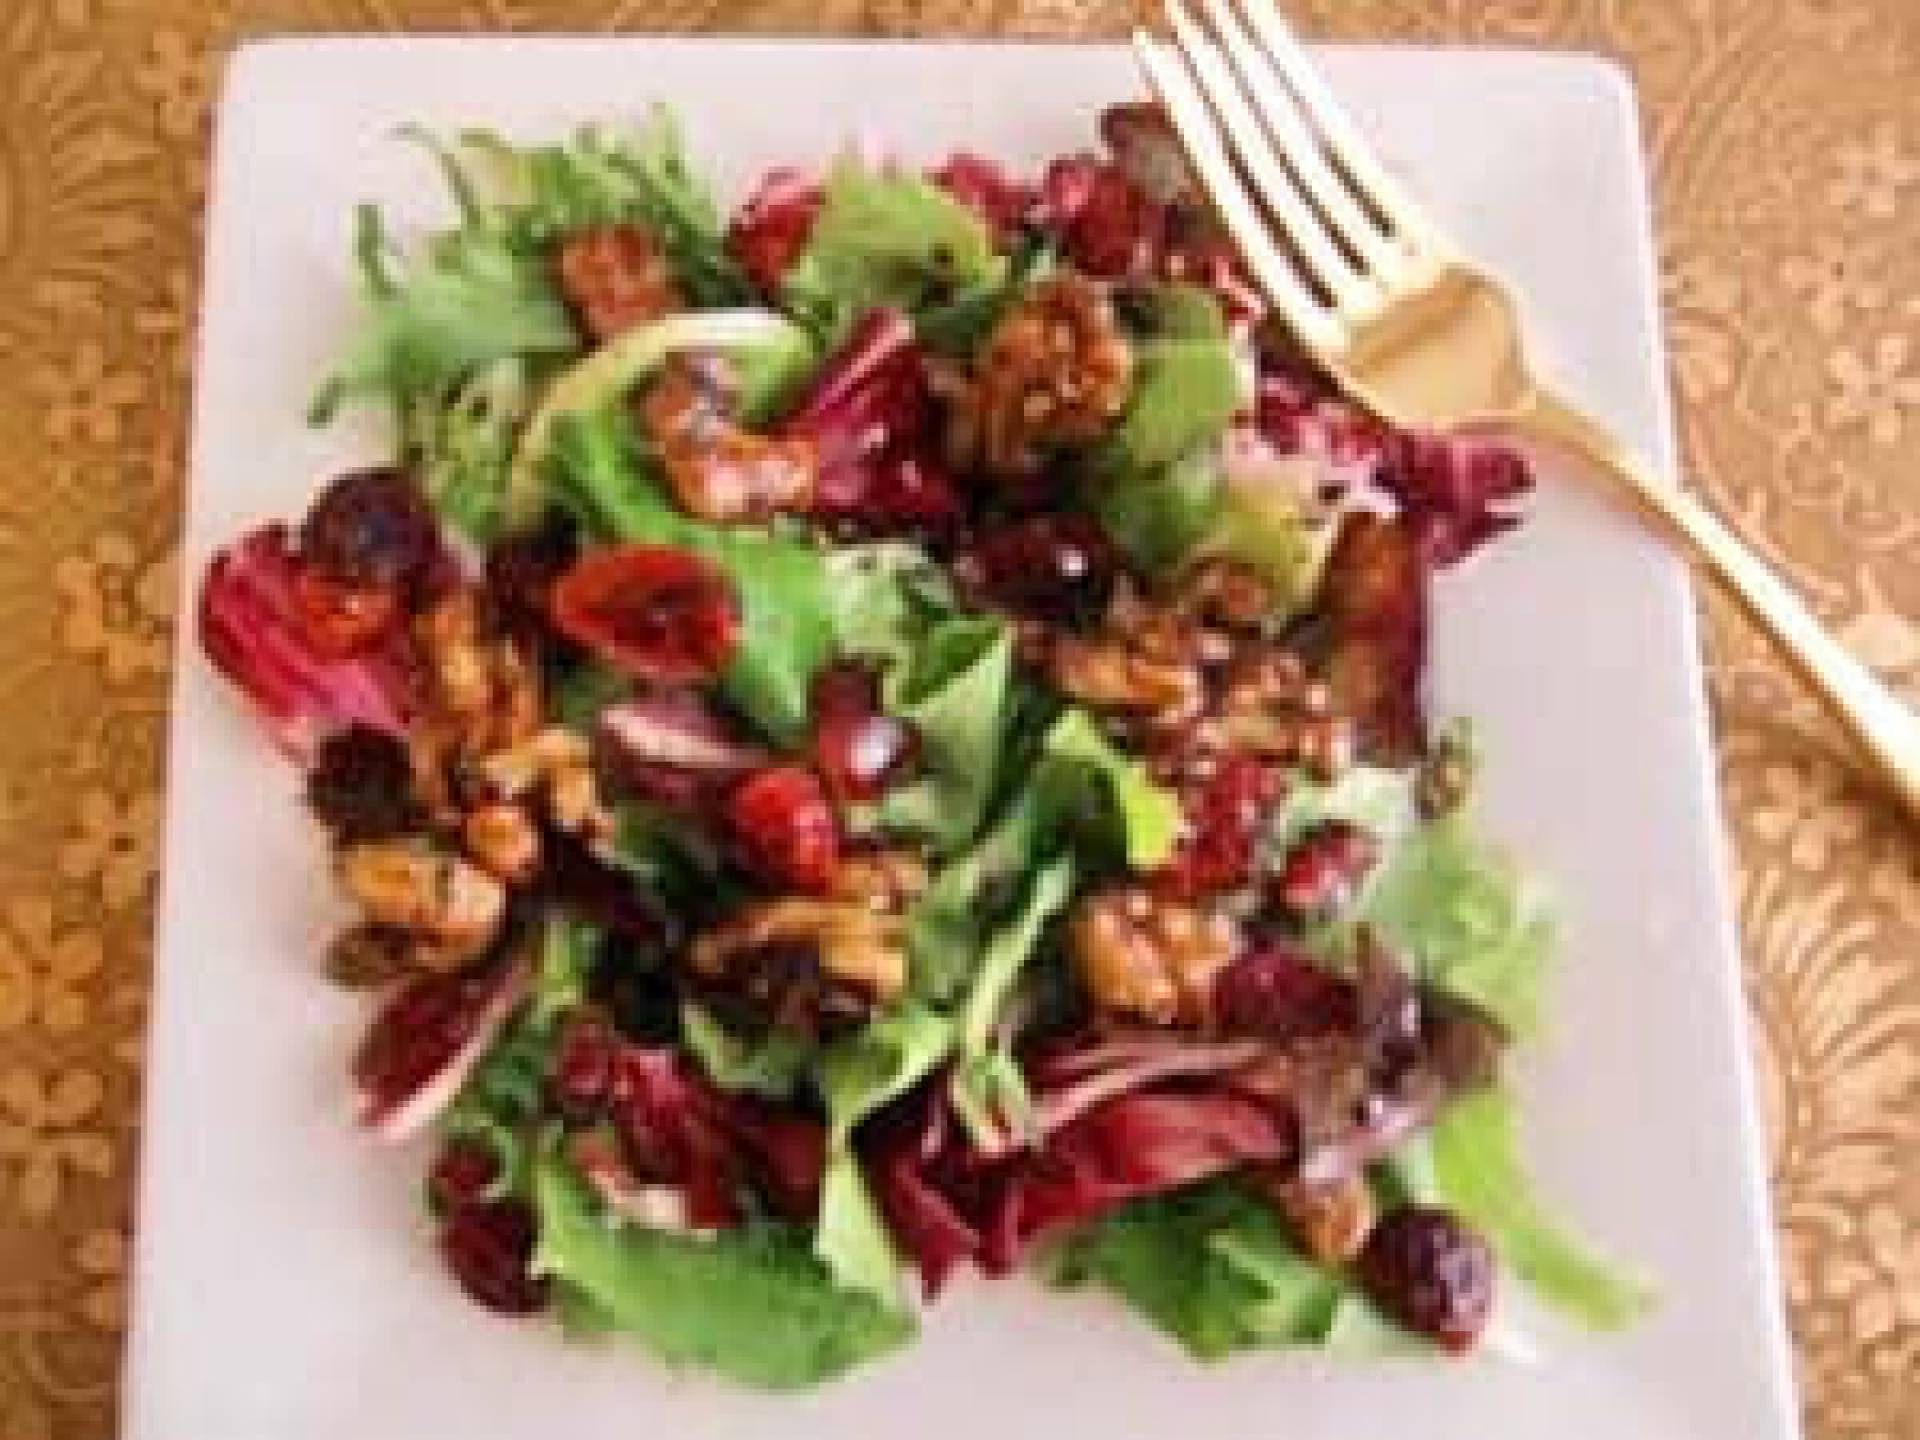 HEALTHY PORTION-Roasted Chicken Salad w/Organic Greens, Cucumber, Tomato, Sharp Cheddar, Honey Roasted Nuts & Dried Cranberries, Red Onions, Croutons & Ranch Vinaigrette.